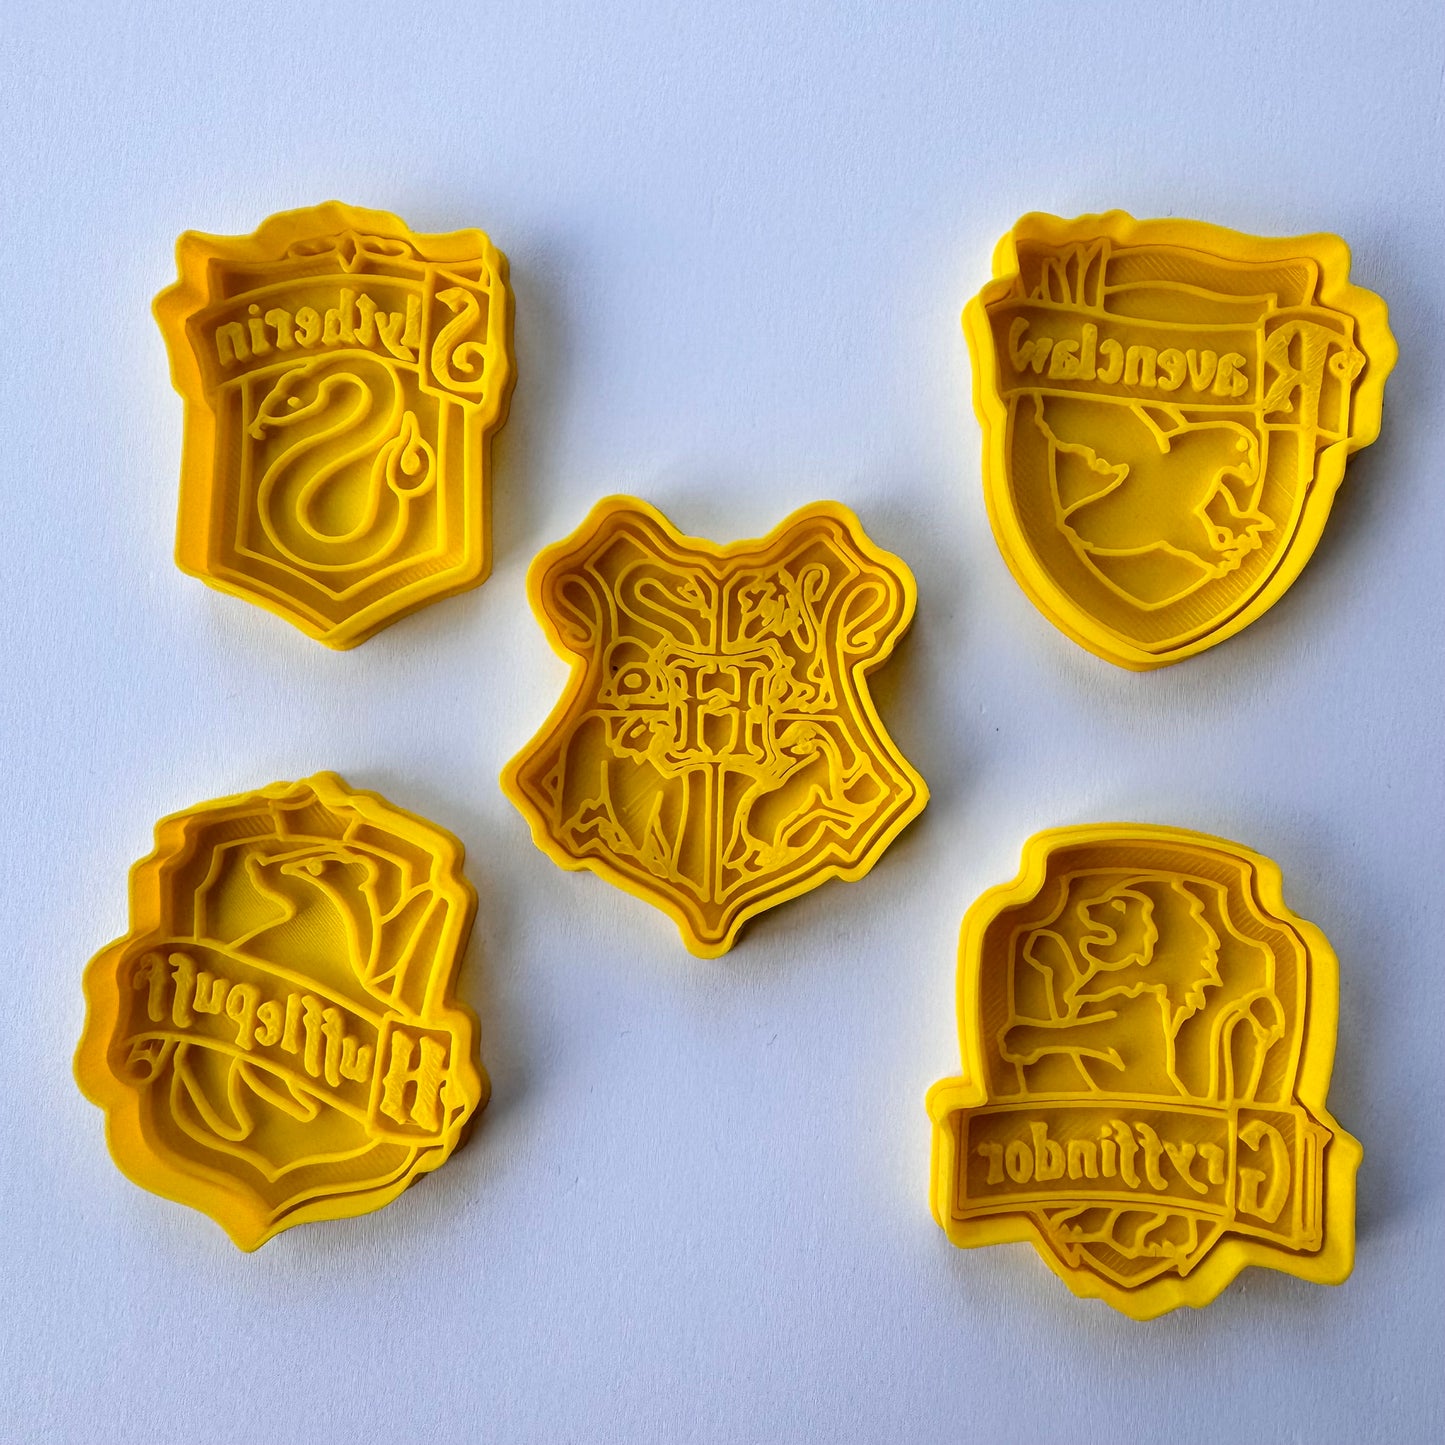 4 HOUSES + 1 Hog. Crest - Harry Potter-inspired Cookie Cutter